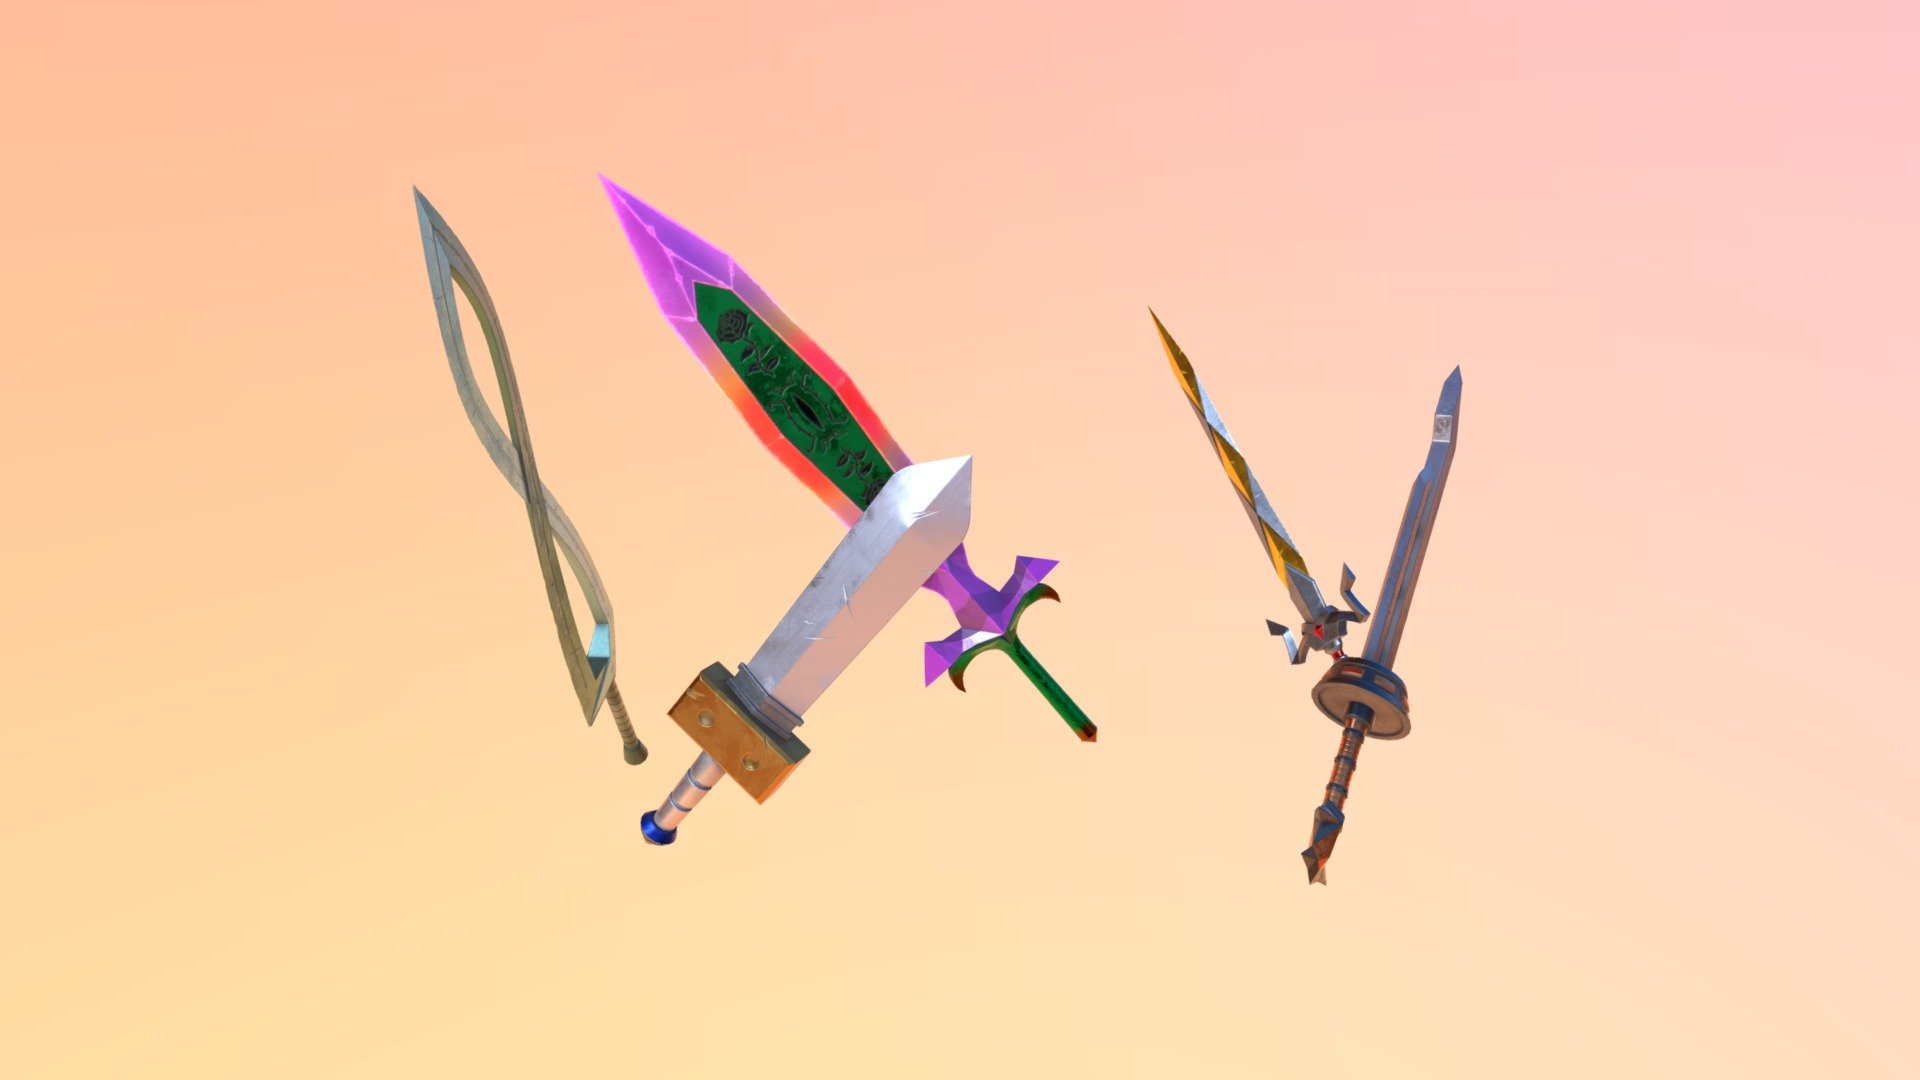 Whoa, it's been a really long time since I've posted anything here.  So I thought I'd post a little personal fan art project here again.  This time it's of the five swords that Link acquires in Majora's Mask.  I tried to keep them similar to official art where possible, but also using the in game models as reference too.  It's interesting how different the Razor Sword art is compared to the model.

Hope you all enjoy these! - Legend of Zelda Majora's Mask Swords - 3D model by atticuskotch 3d model